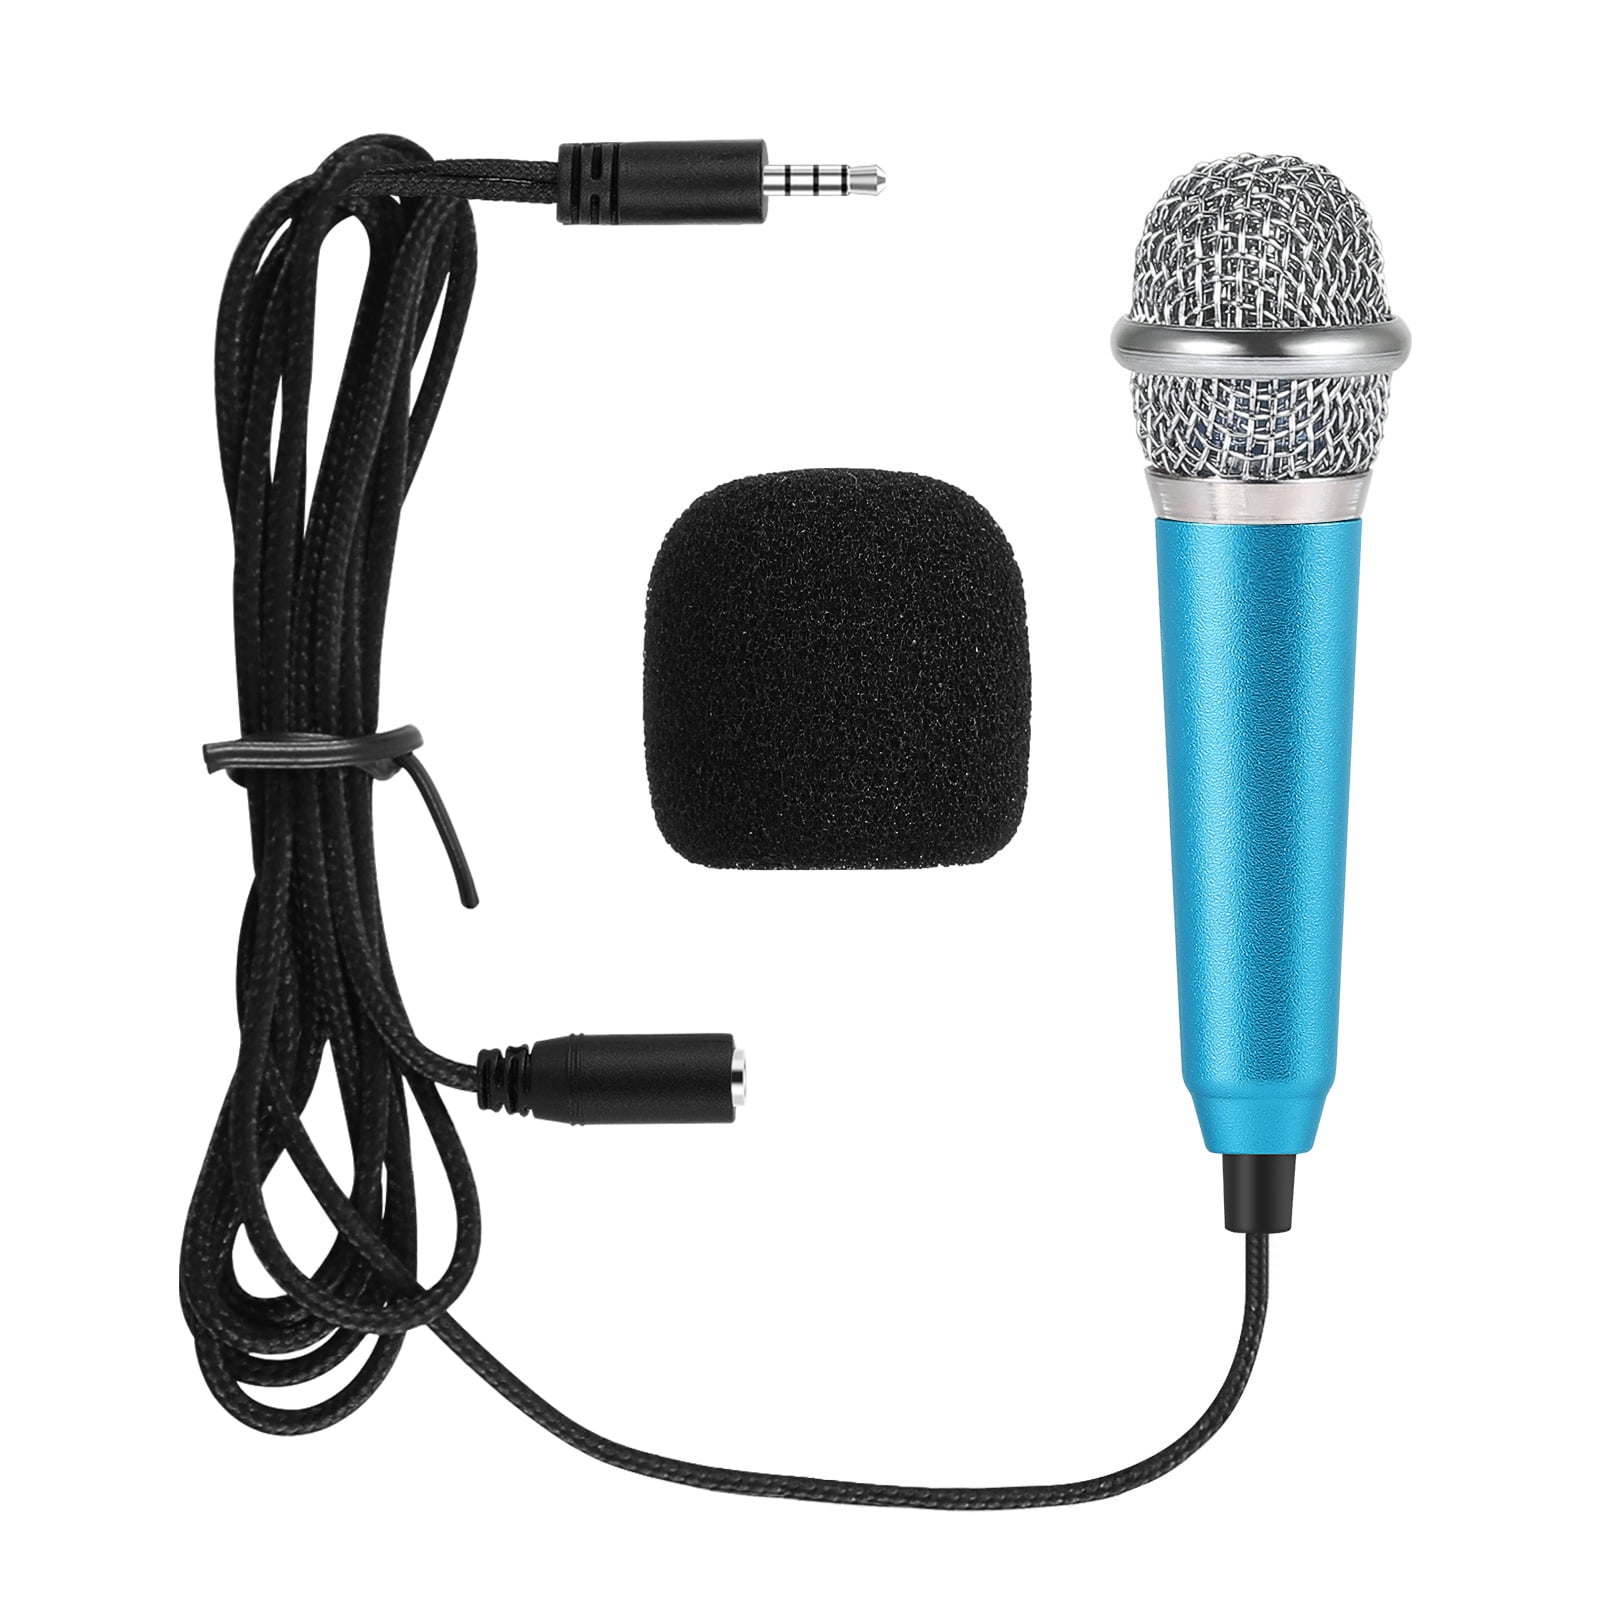 Black Portable Durable Phone Microphone Mini Mic Easy to Operate for Computer Recording for Speech Voice Recording Lapel Microphone 